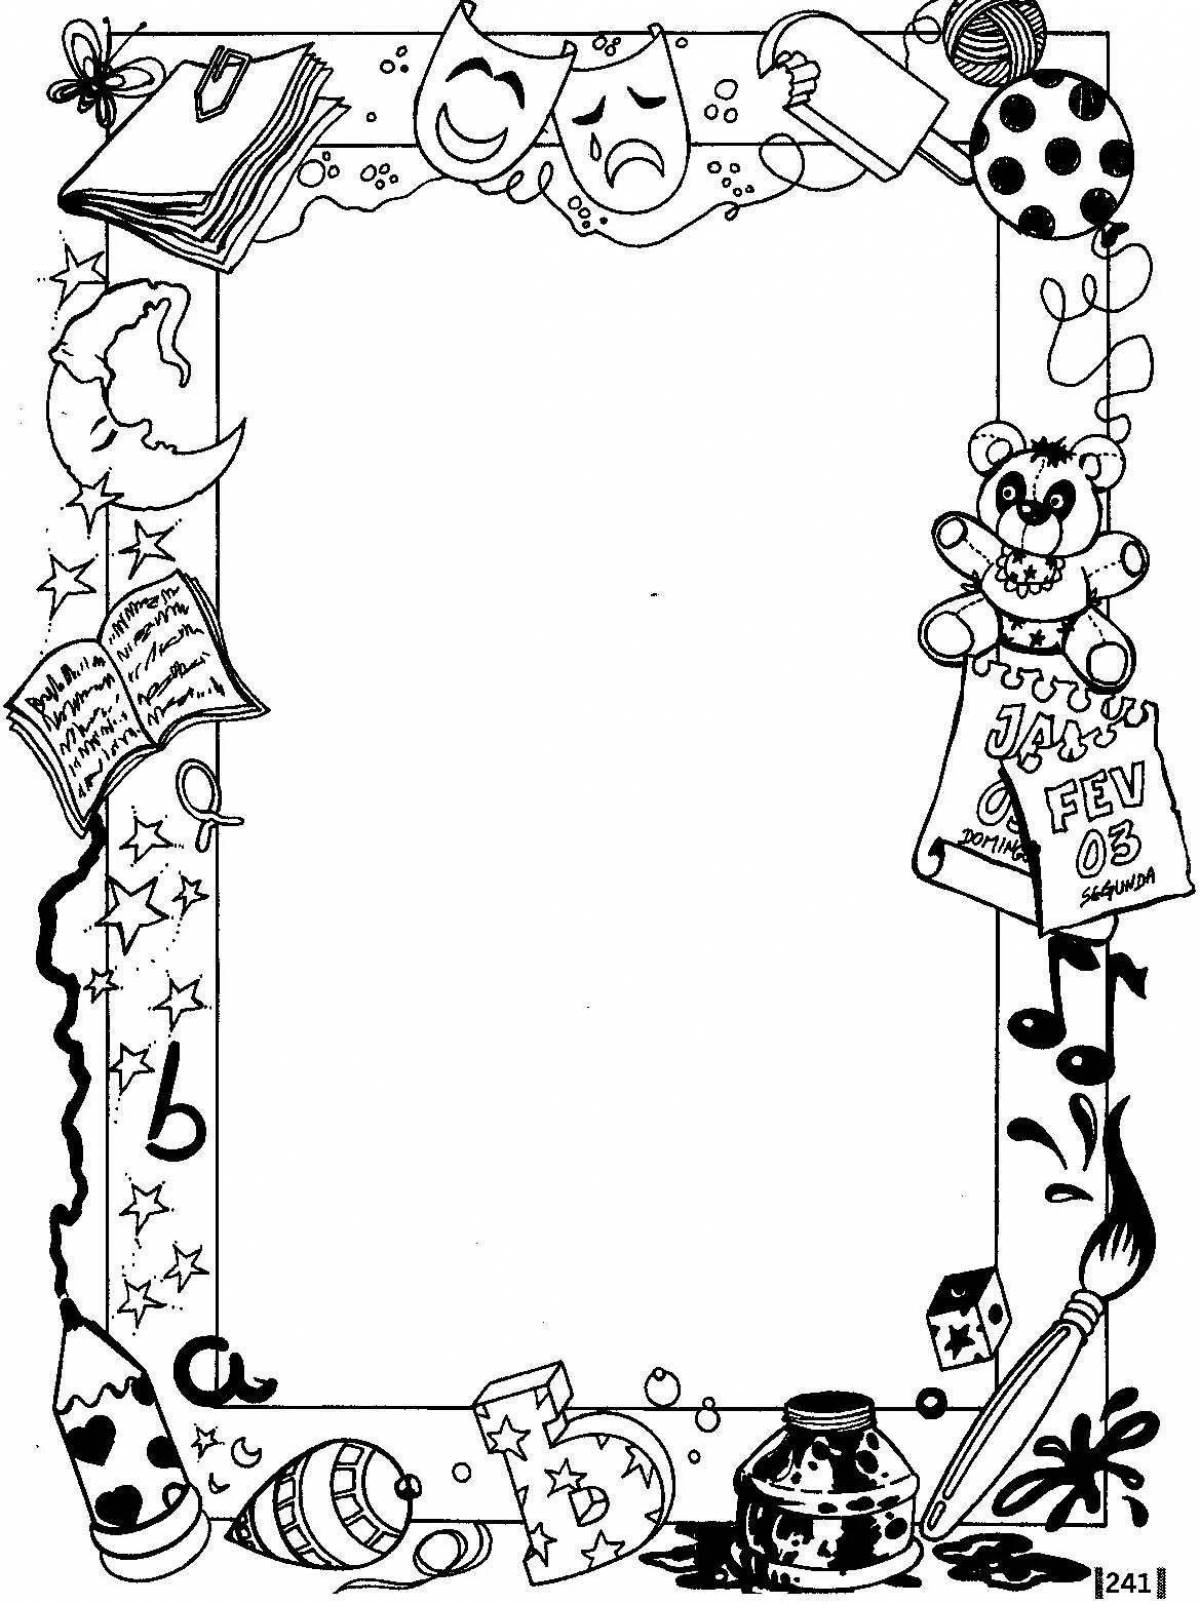 Advertising for a dynamic coloring page